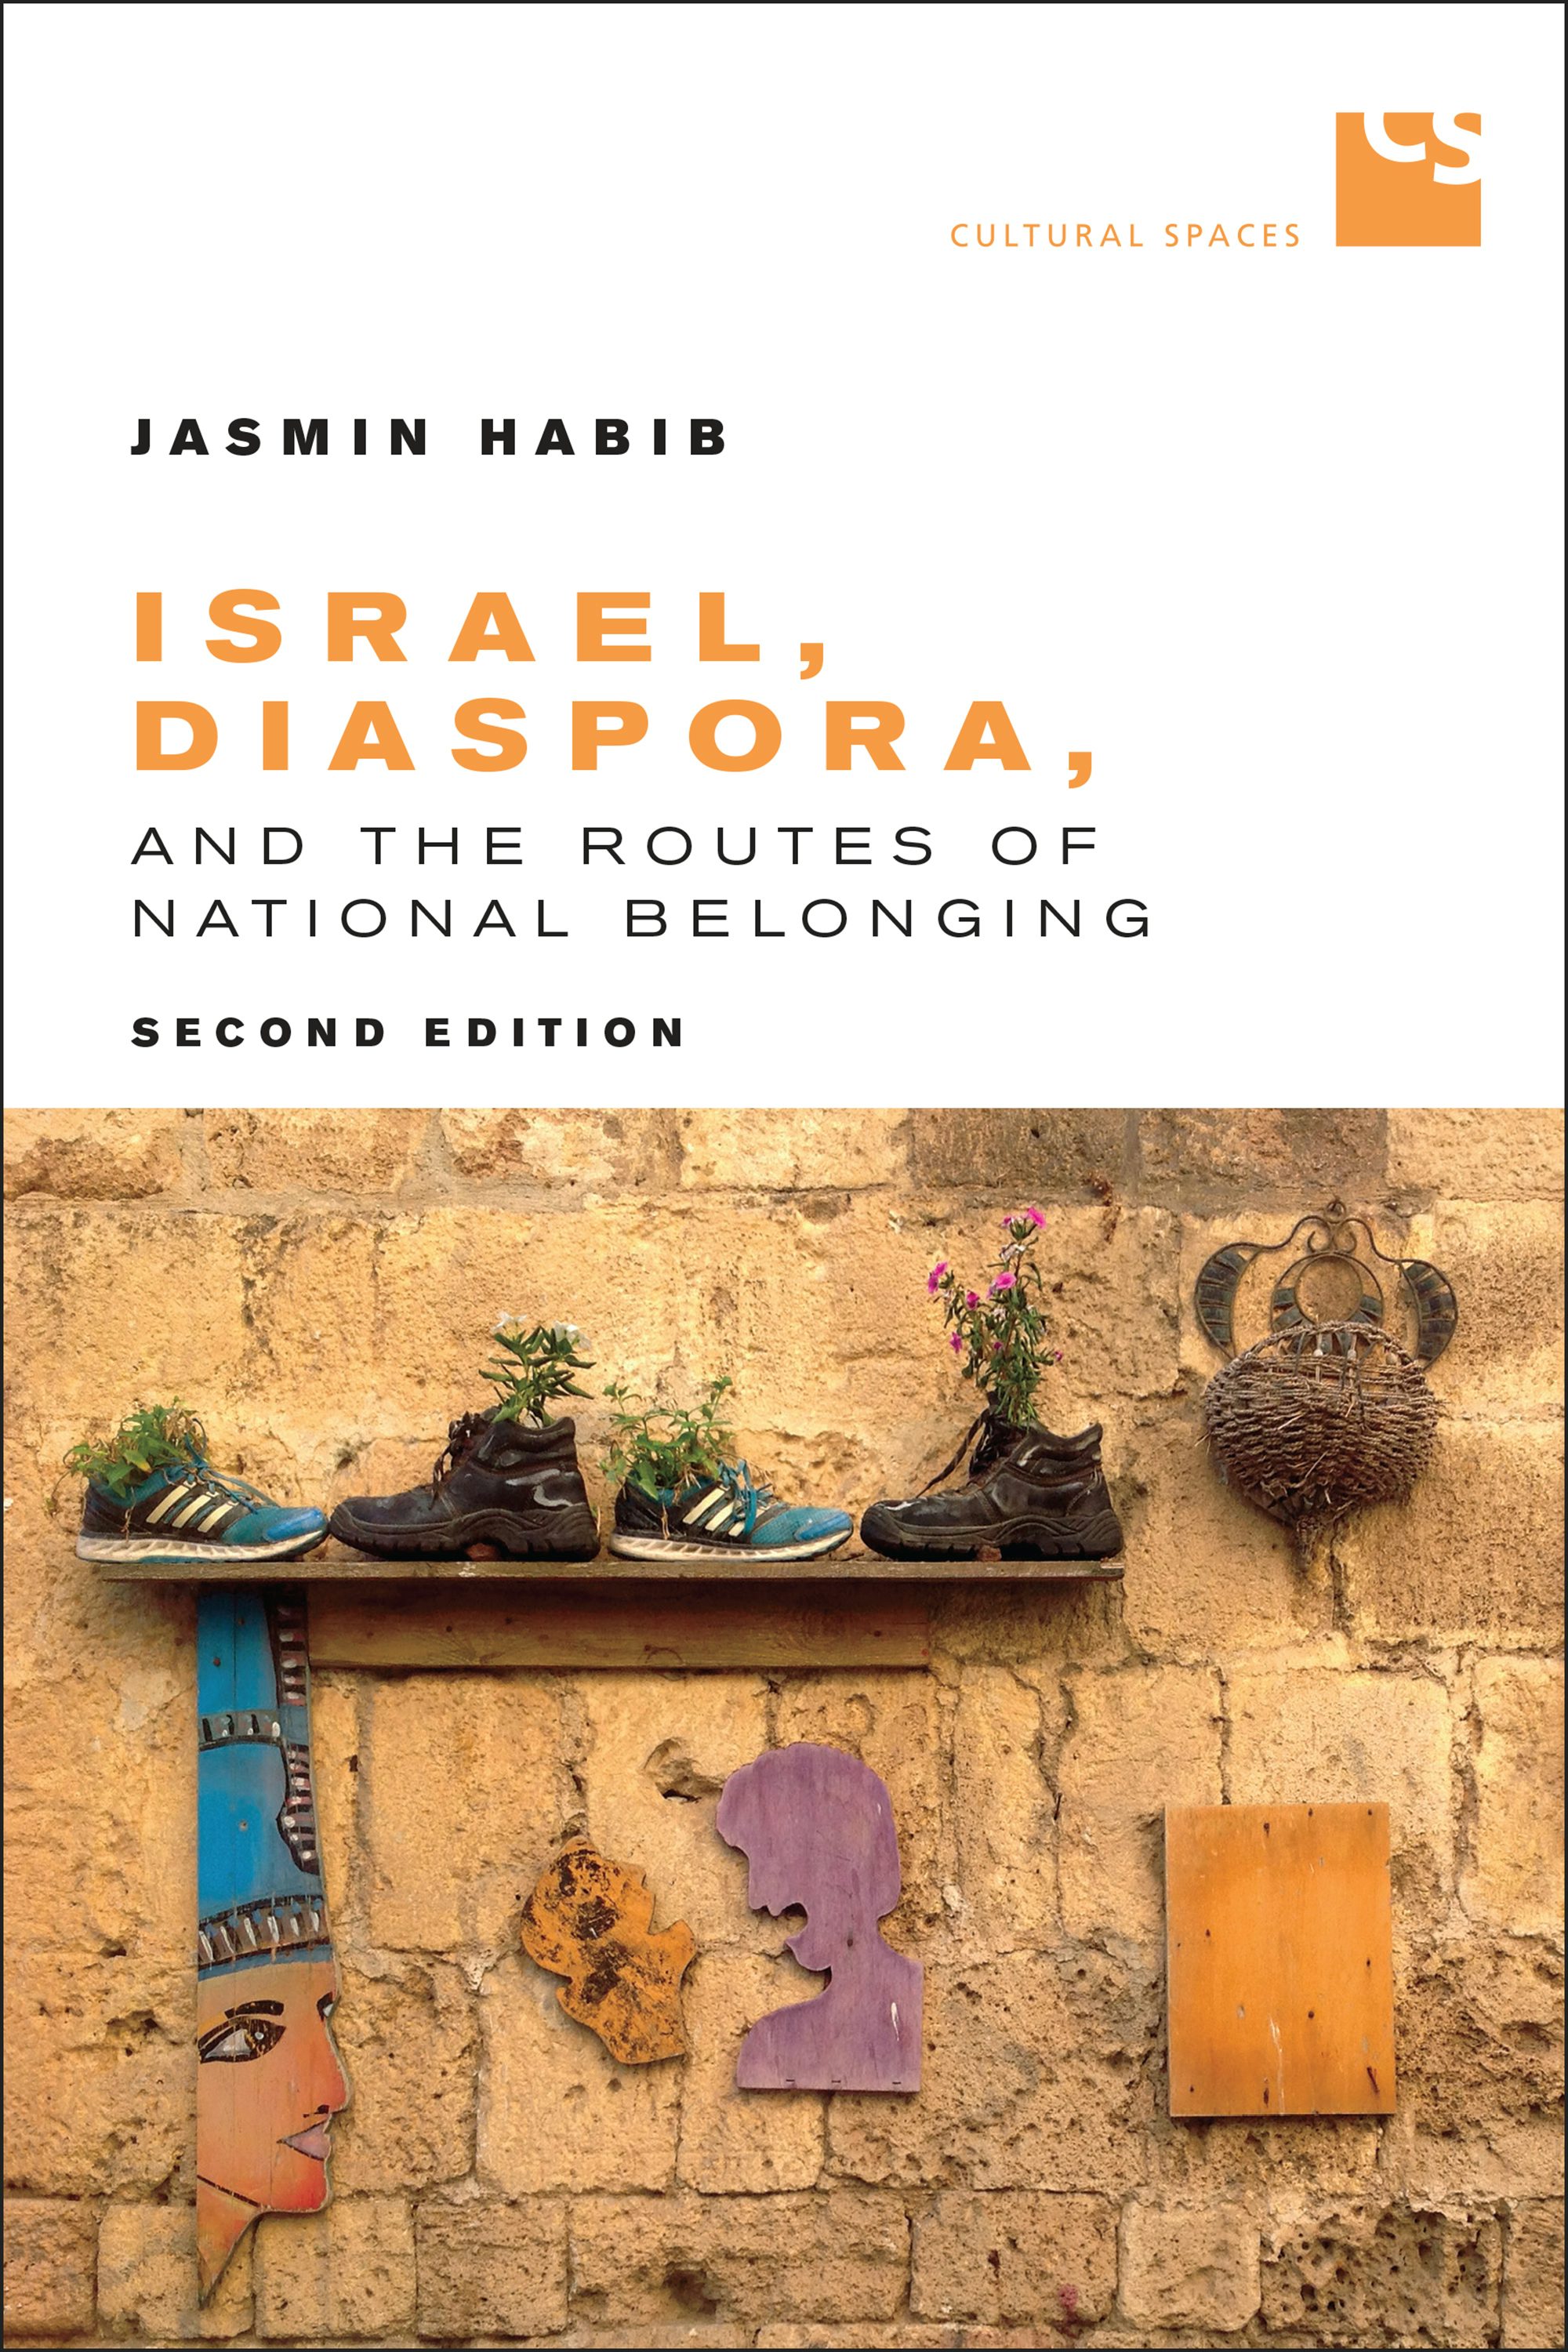 Israel, Diaspora, and the Routes of National Belonging, Second Edition